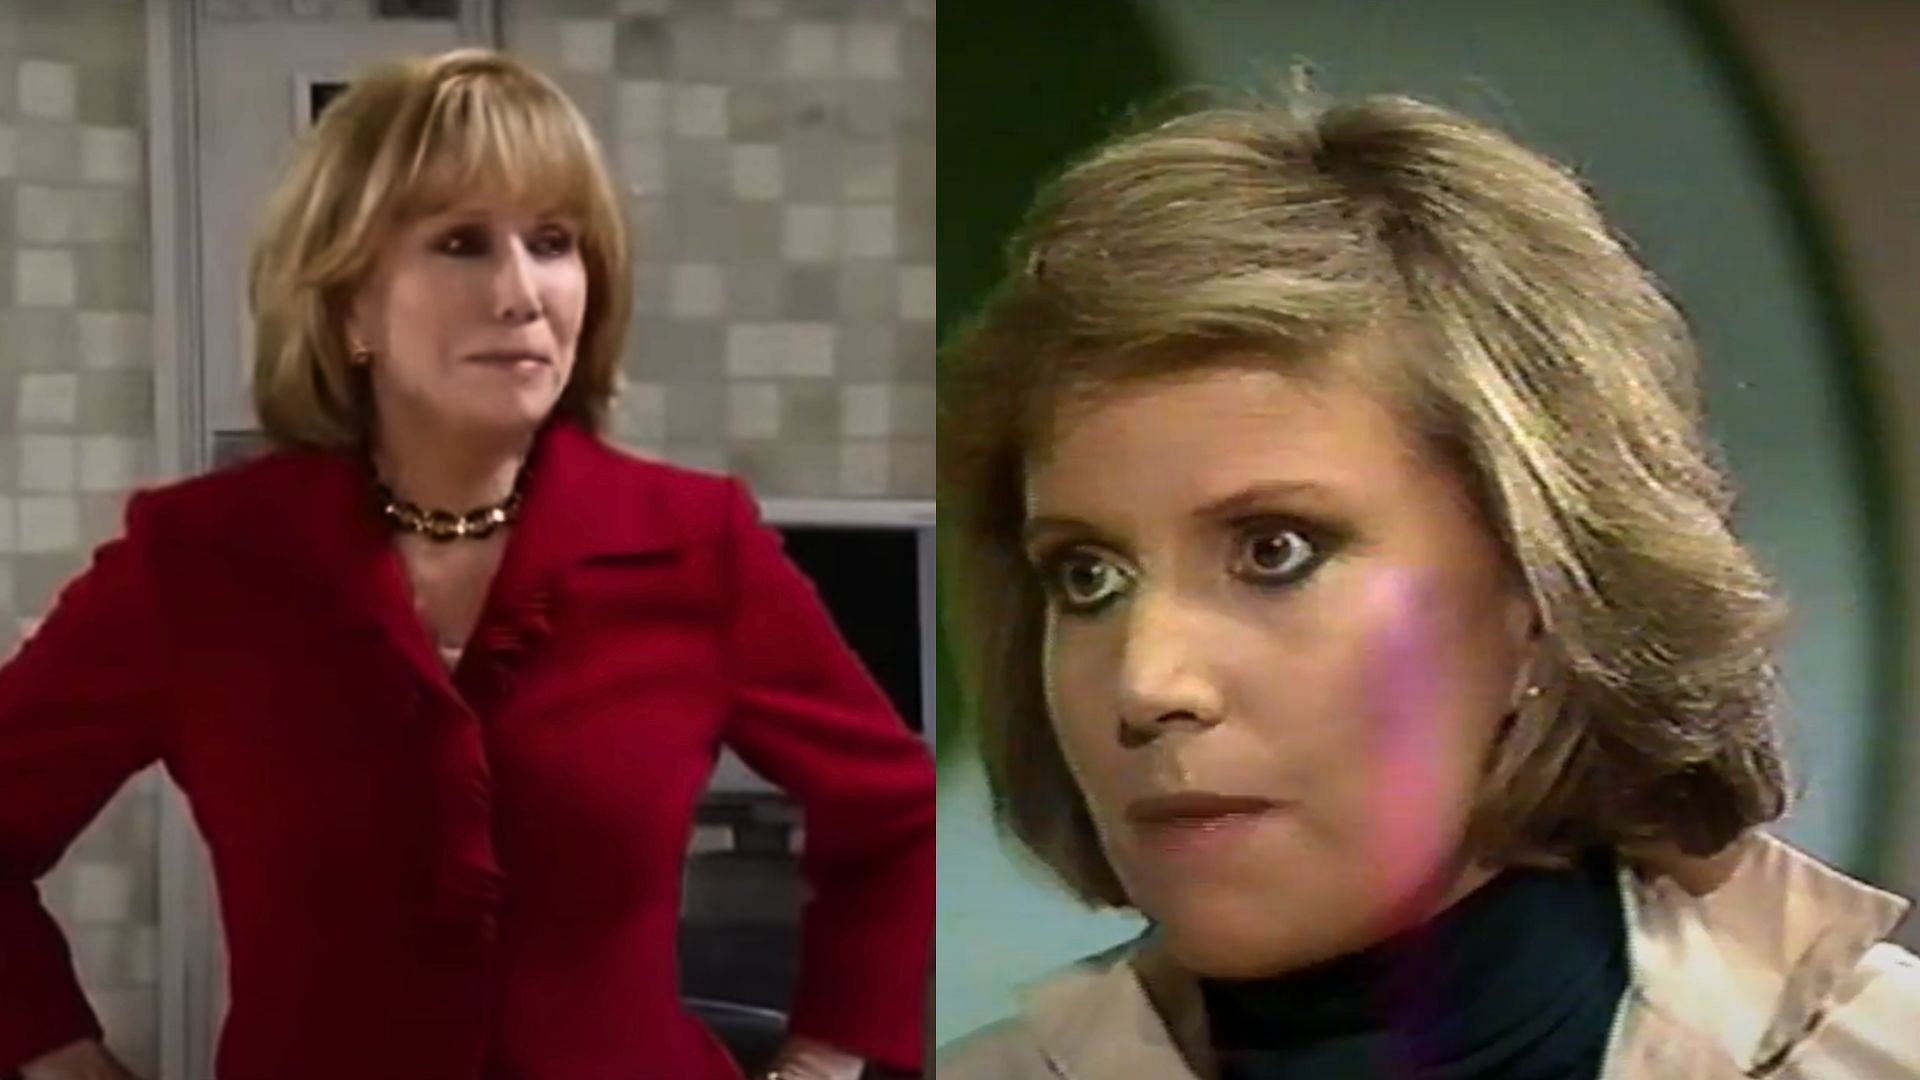 Monica Quartermaine is a lively character in the show (Image via ABC and YouTube@ackgh73994)